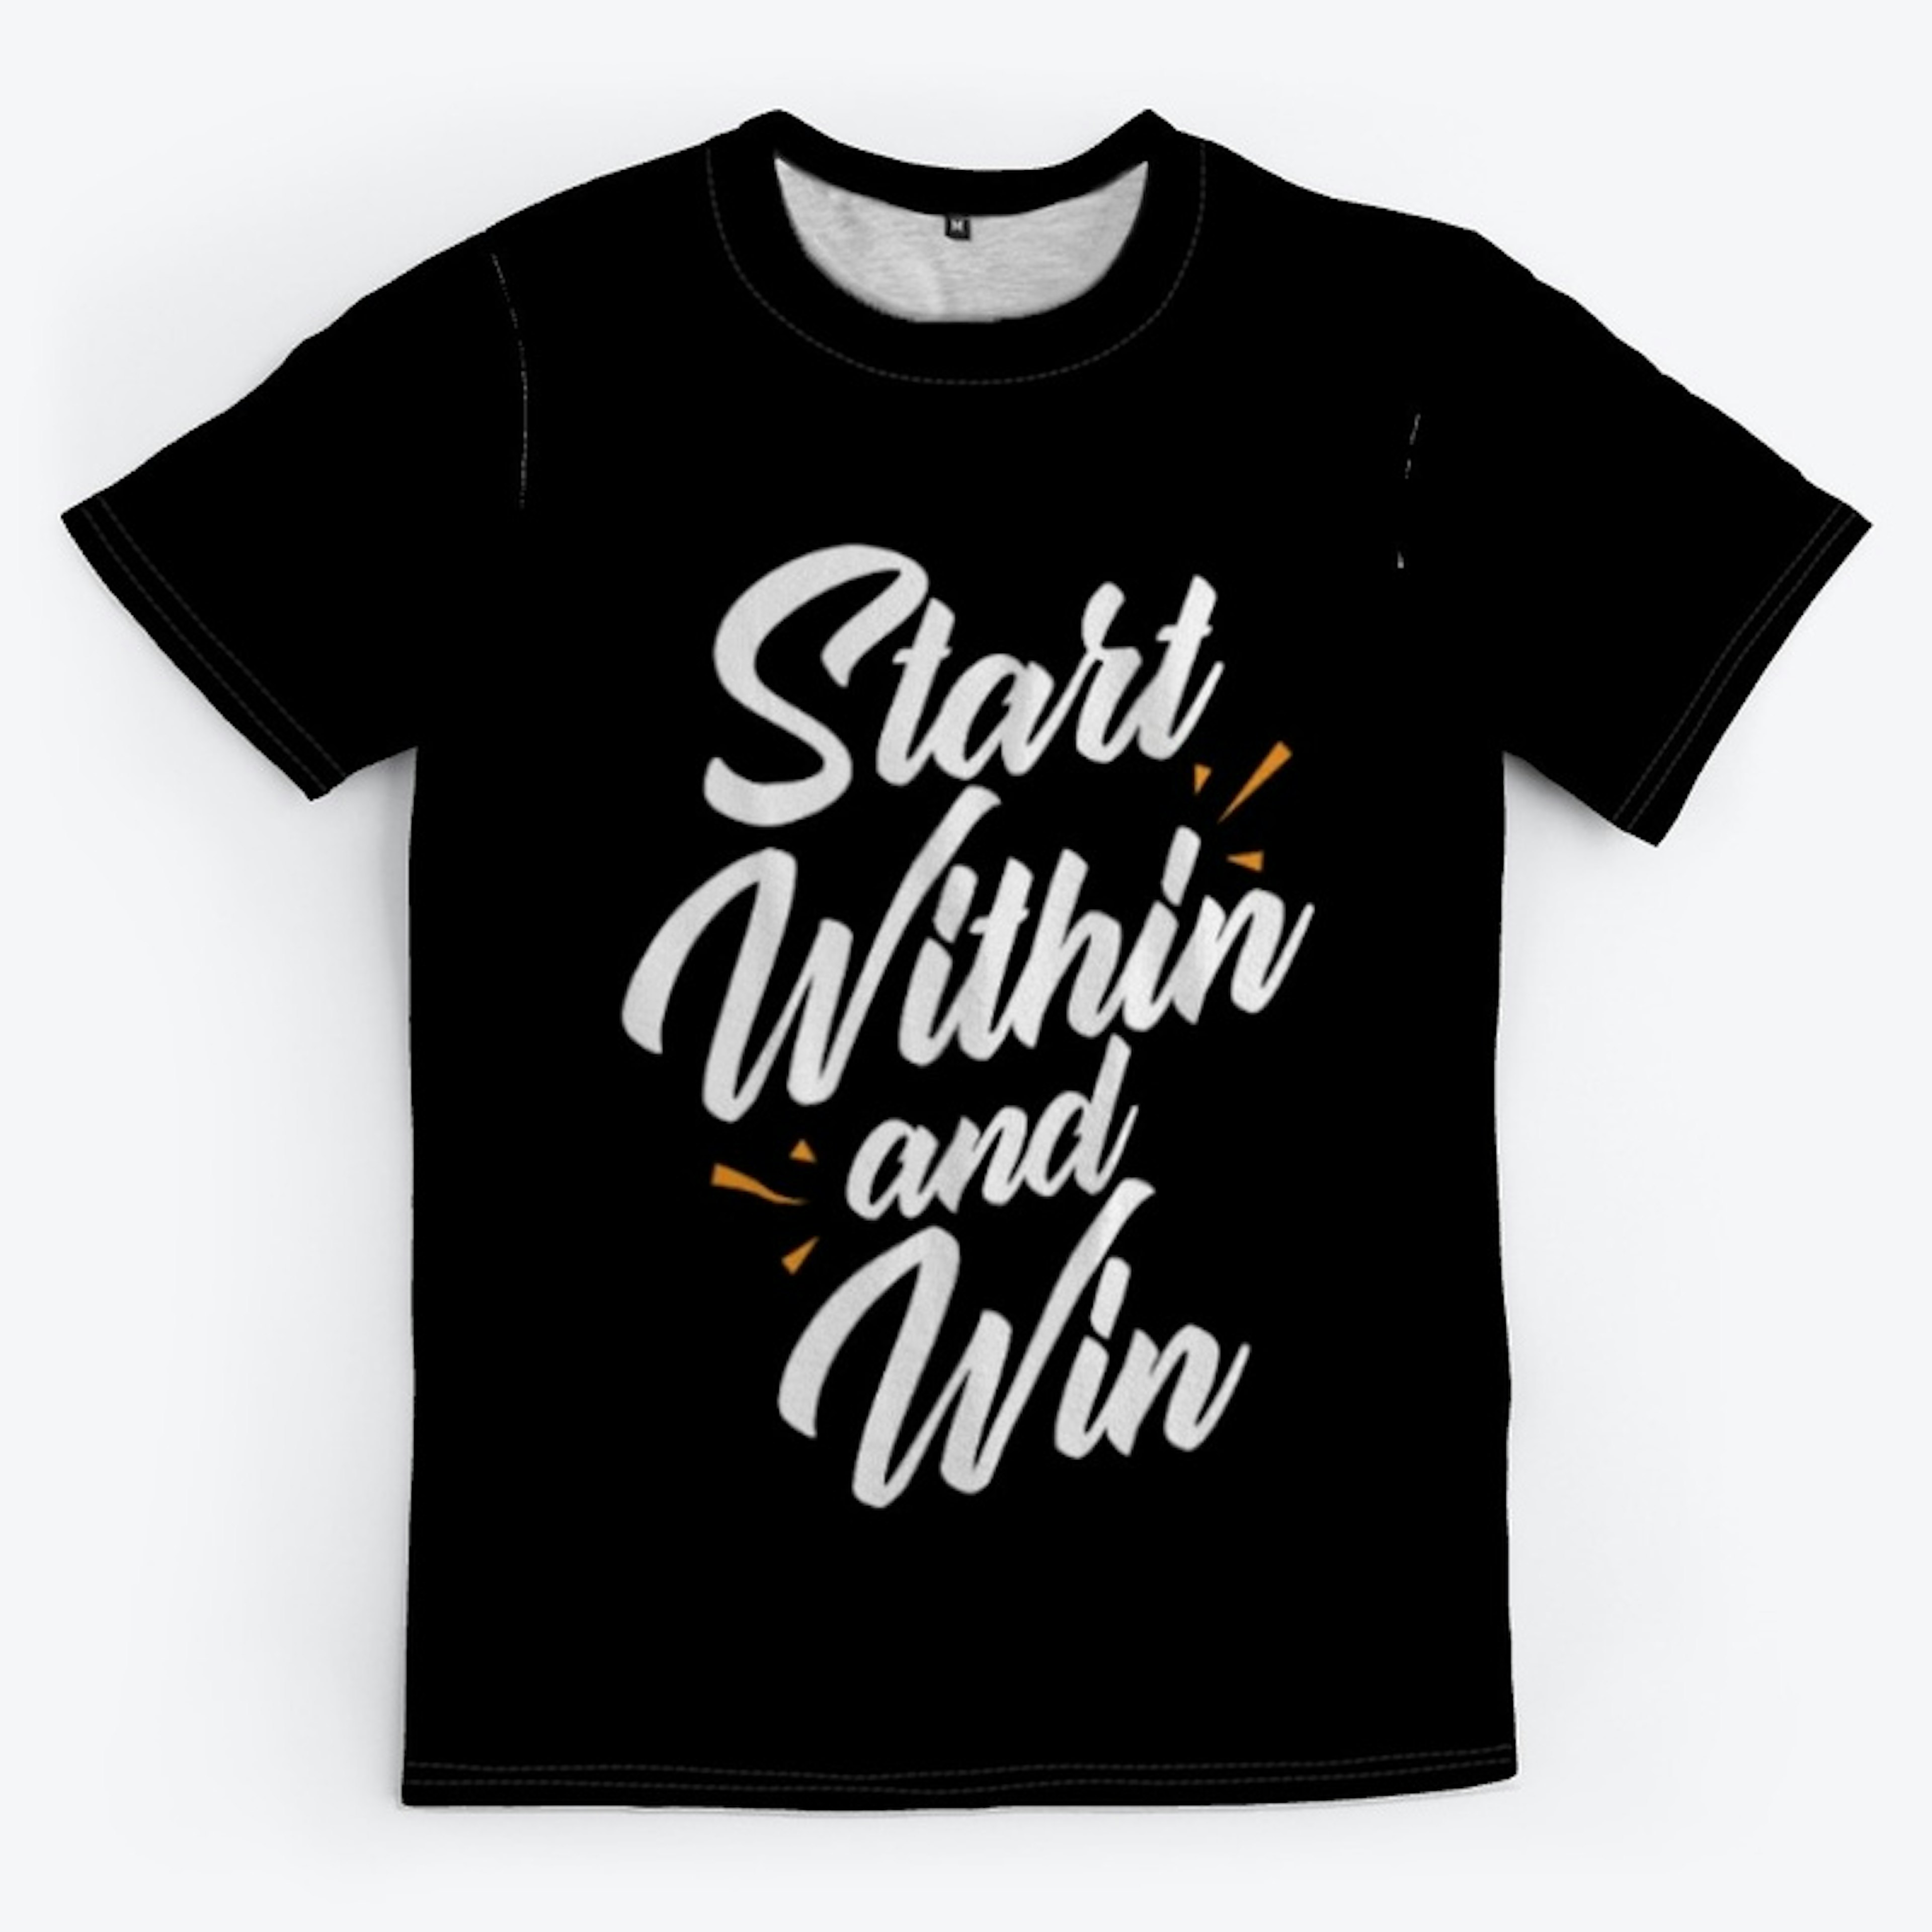 Start Within and Win White Design